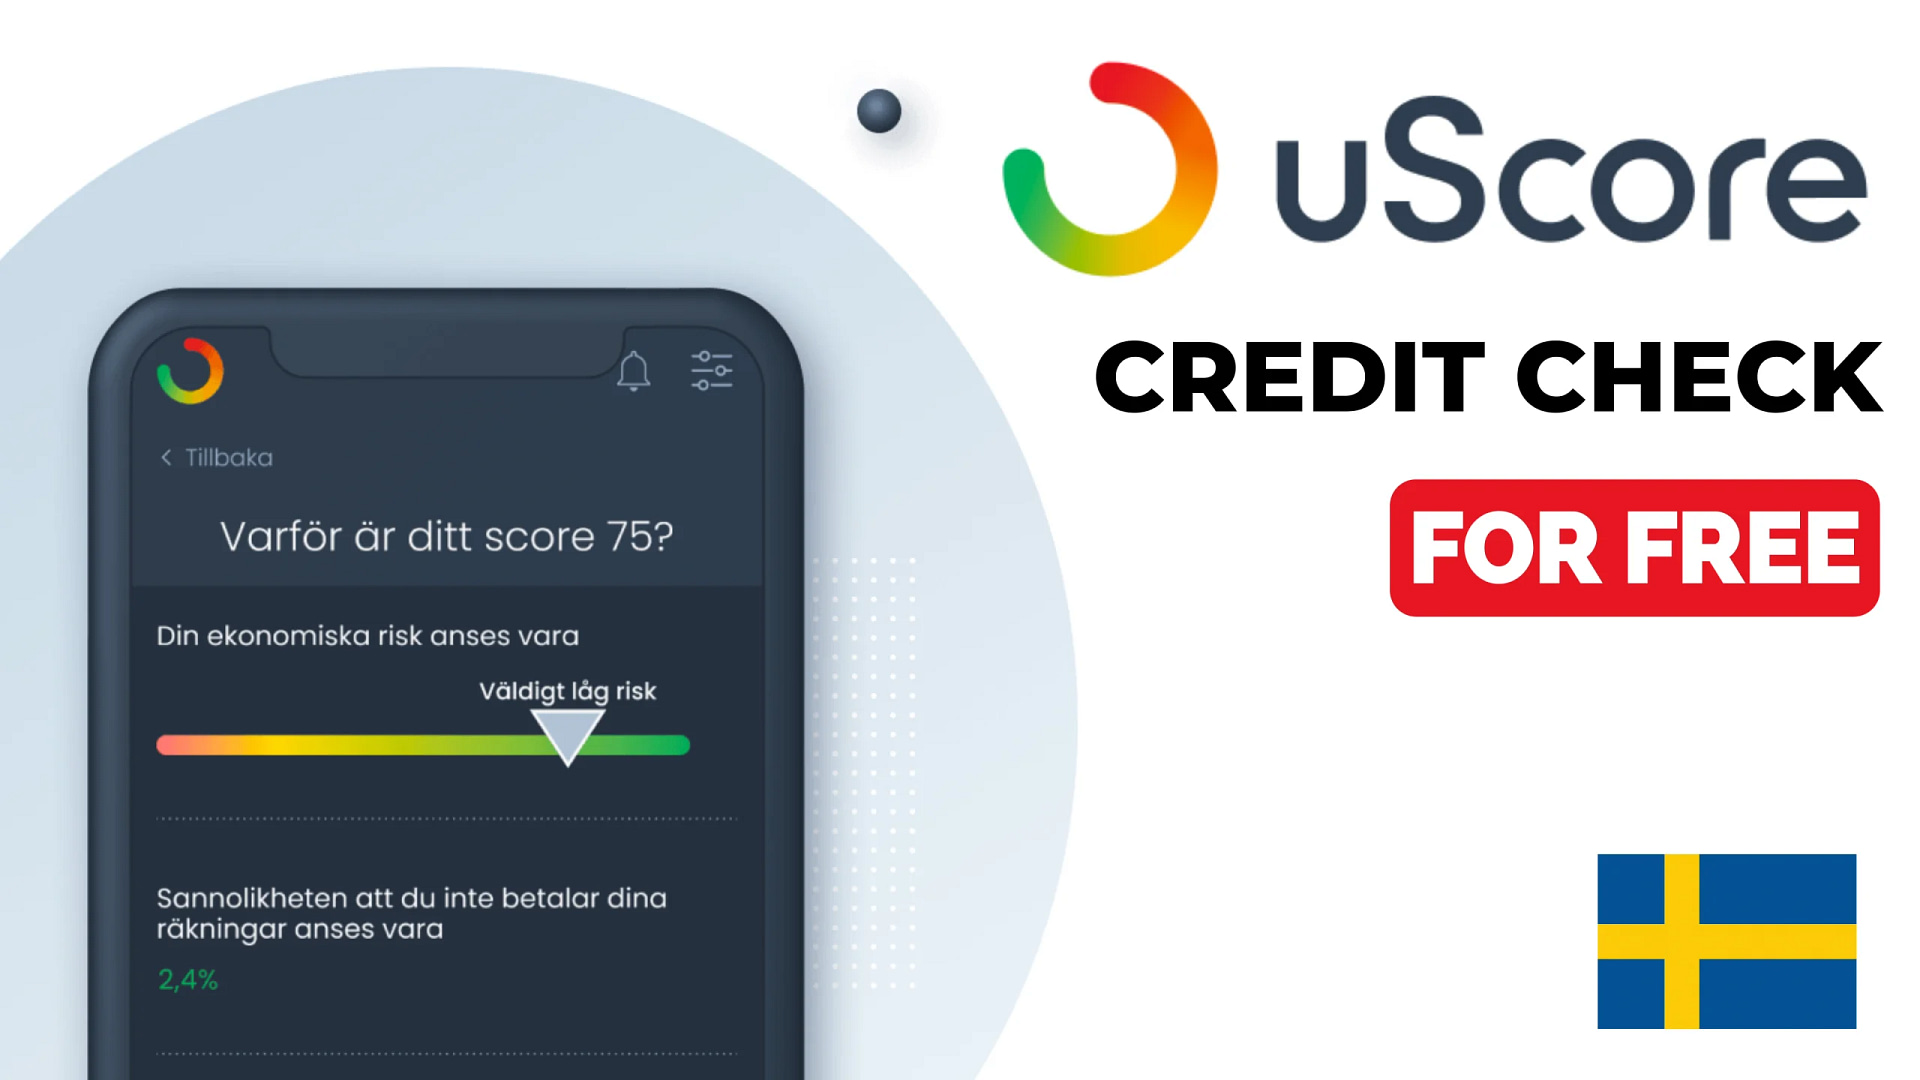 uScore: Check your credit score in Sweden for FREE